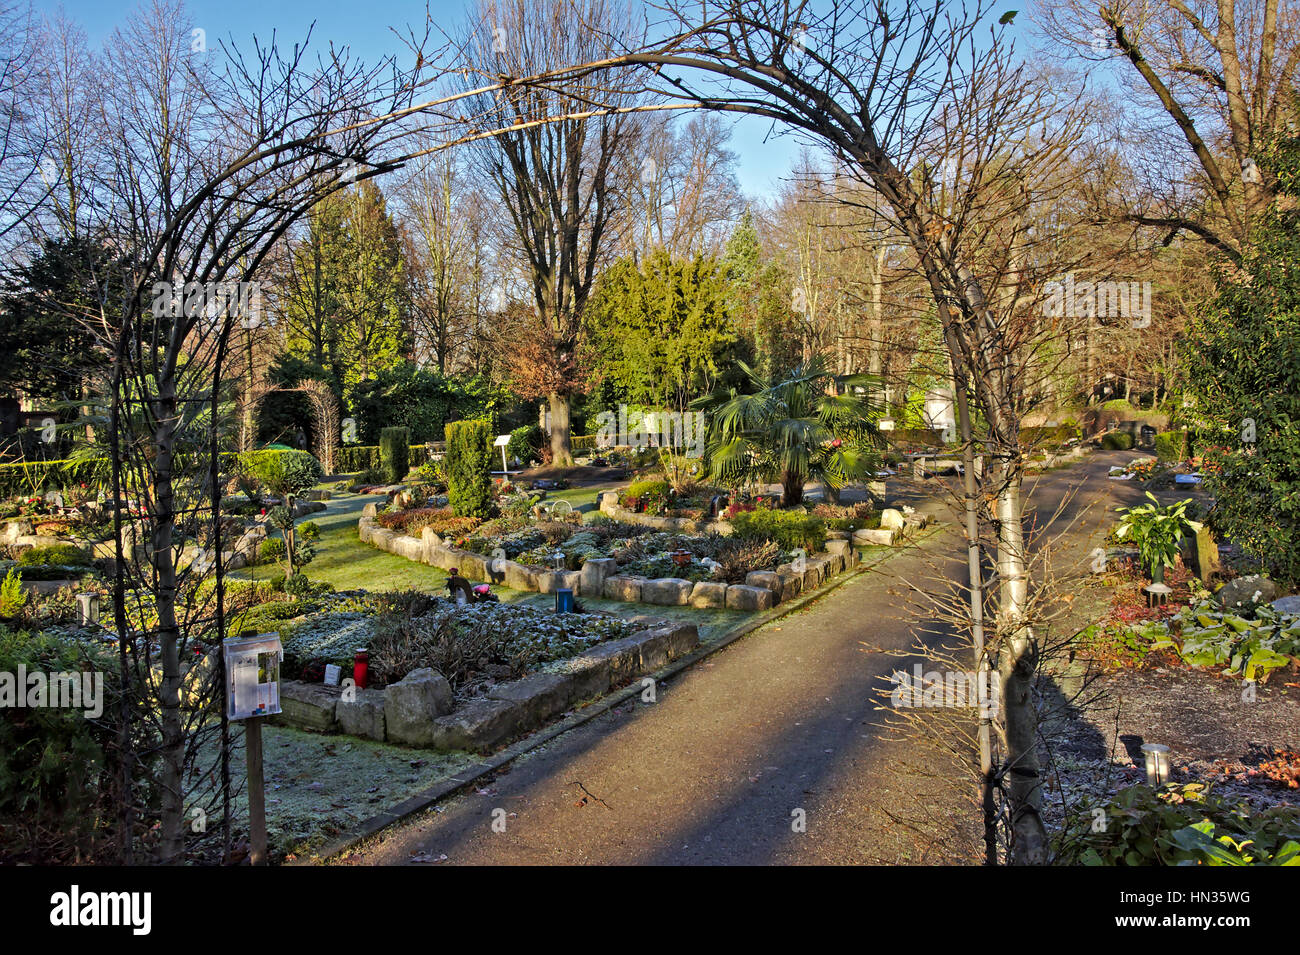 Green funeral garden with graves and urns in `MelatenFriedhof` cemetery, Cologne Stock Photo